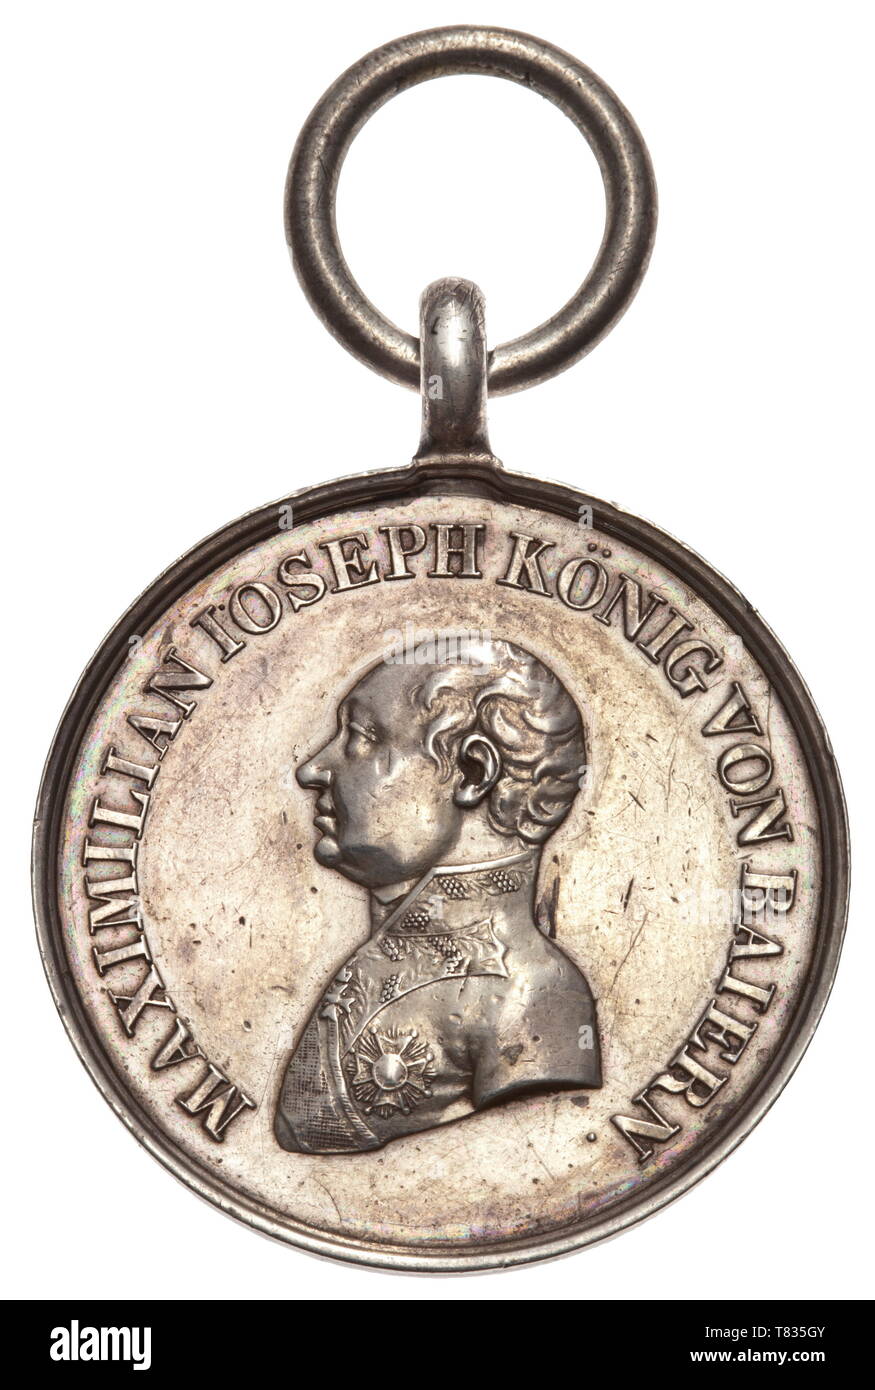 A Military Merit Medal in Silver from the Franco-German War 1870/71 Very precisely struck medal of the stamp used after 1848 in the typical version for 1871 with the robust, semi-circular eyelet. After the Wars of Liberation, Losch's stamped signature under the portrait was omitted, similar to the Military Award for Corpsmen (then hidden in the sleeve section). A total of 799 silver medals were awarded for the war of 1870/71. They are therefore scarcer than the type used for China and the World War with die smith Ries with circa 3,000 bestowals. , Additional-Rights-Clearance-Info-Not-Available Stock Photo